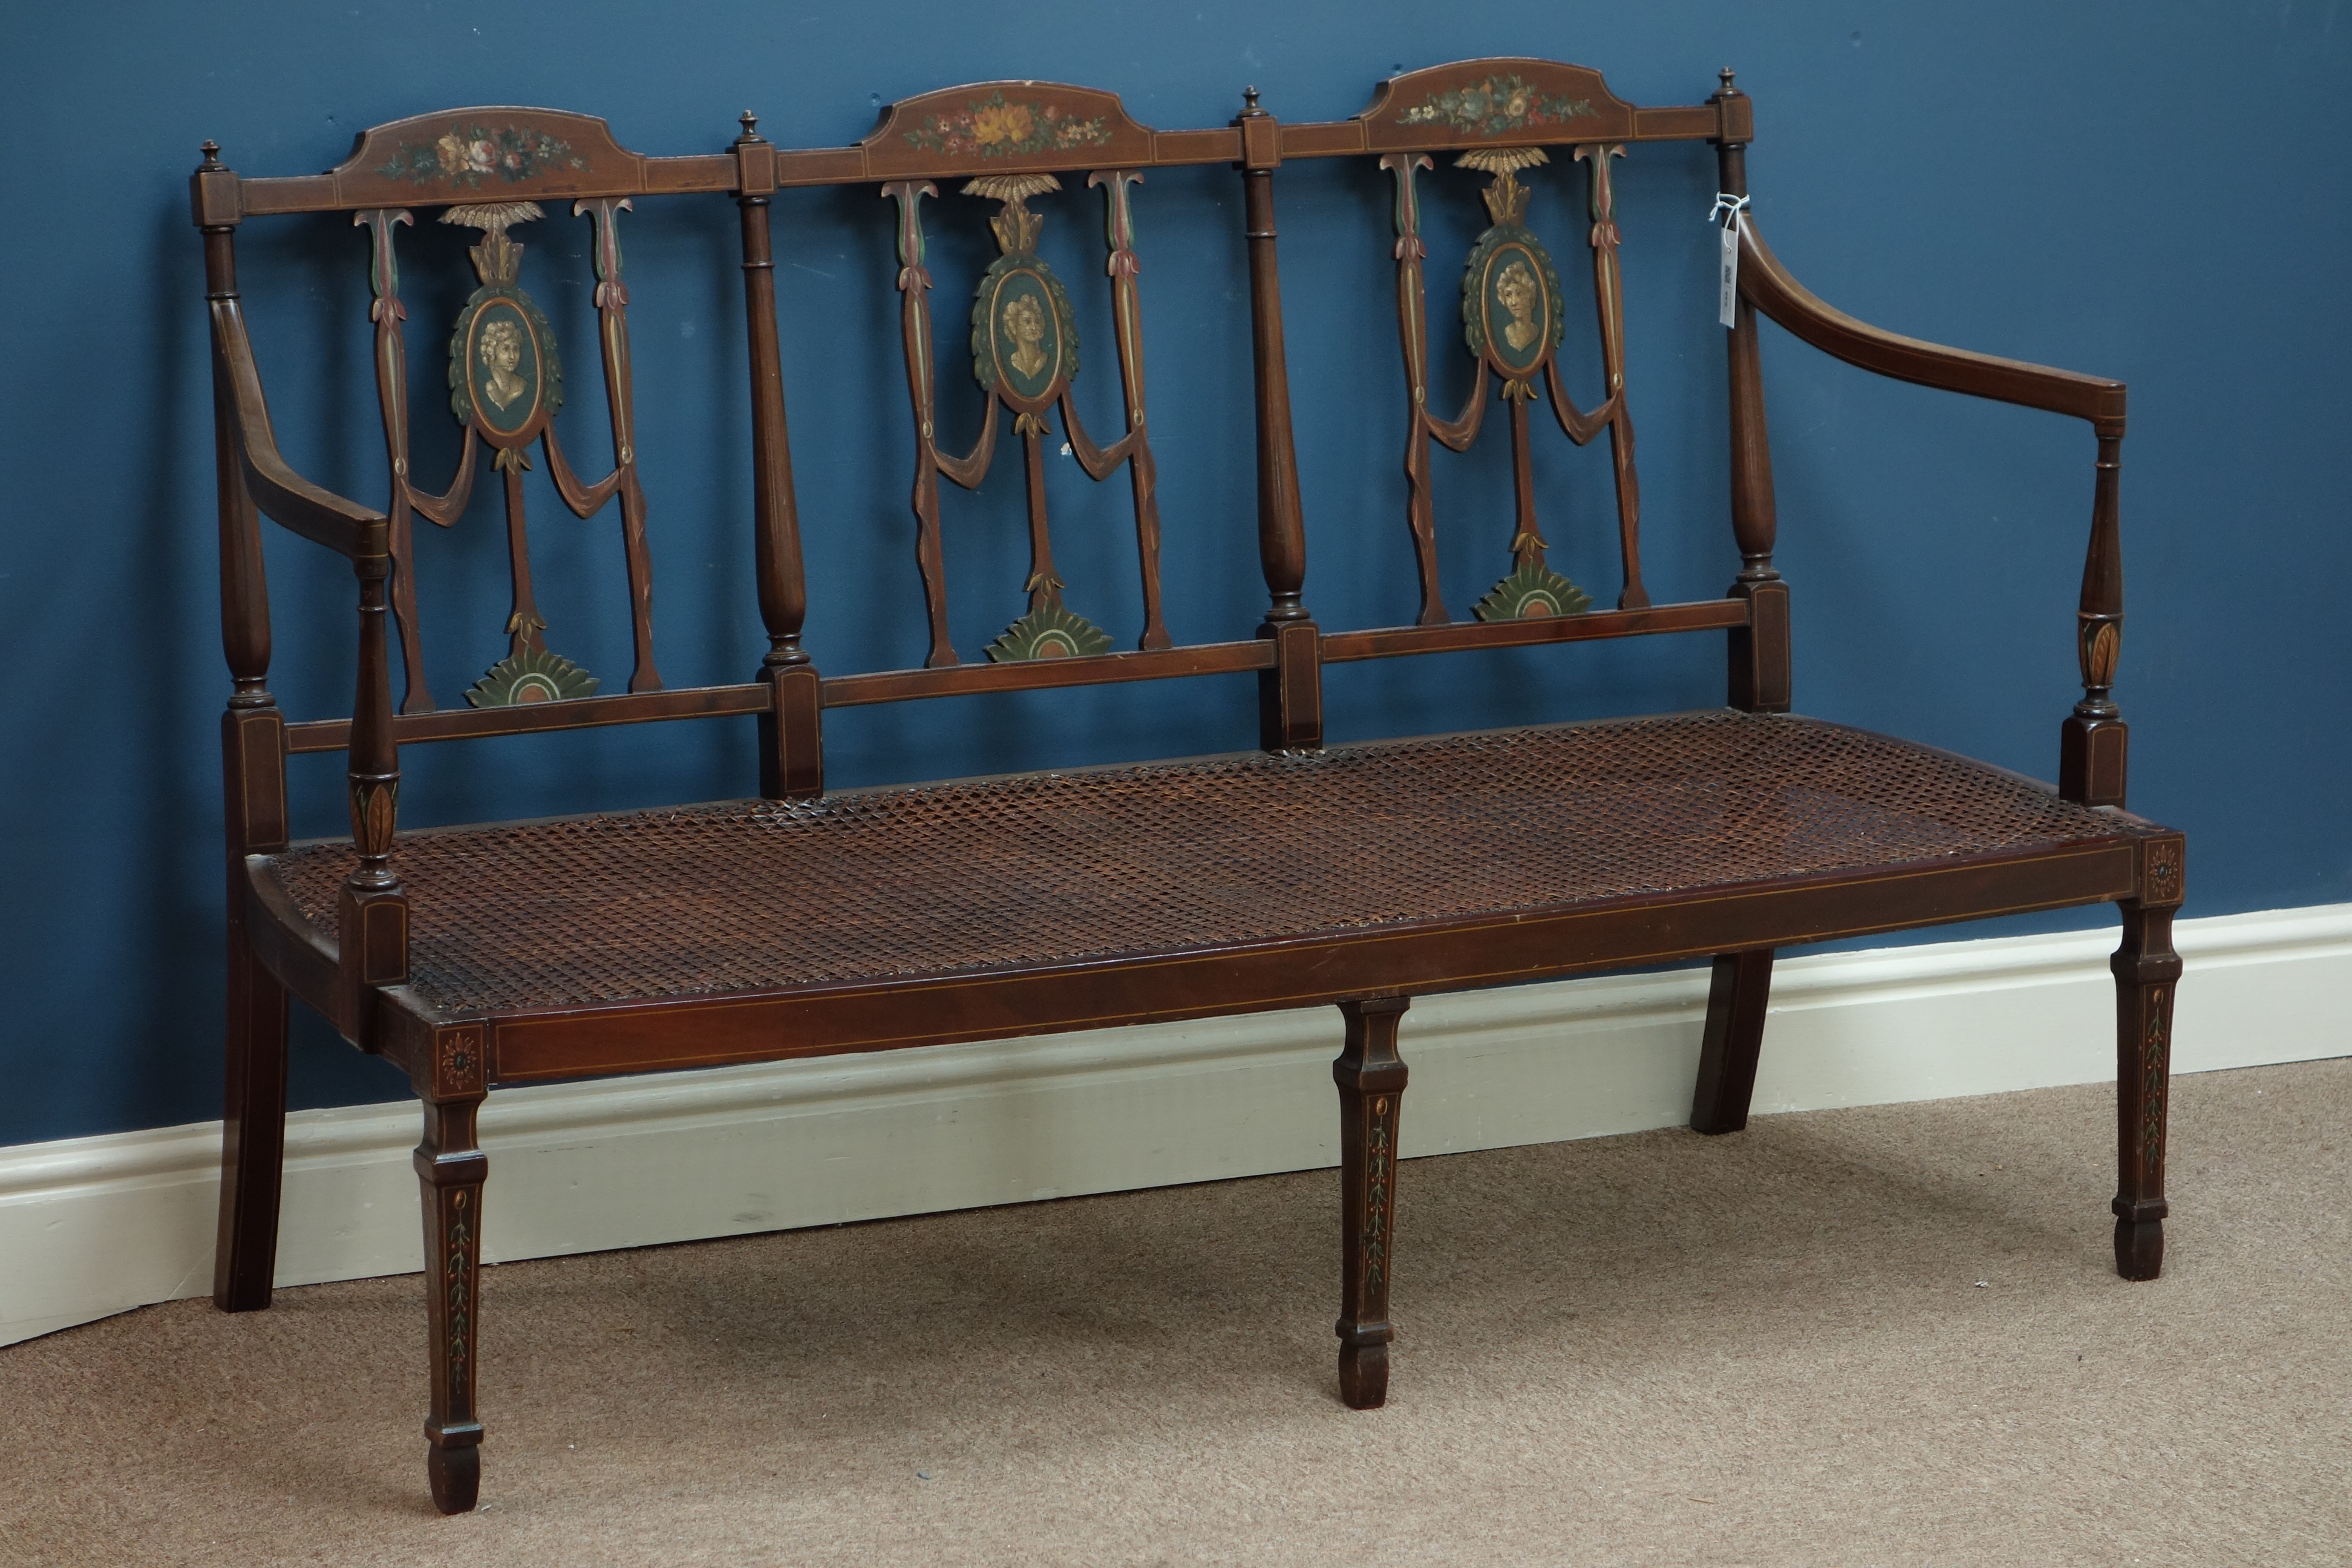 Edwardian inlaid mahogany settee, Neo classical style painting, cane seat with upholstered cushion,